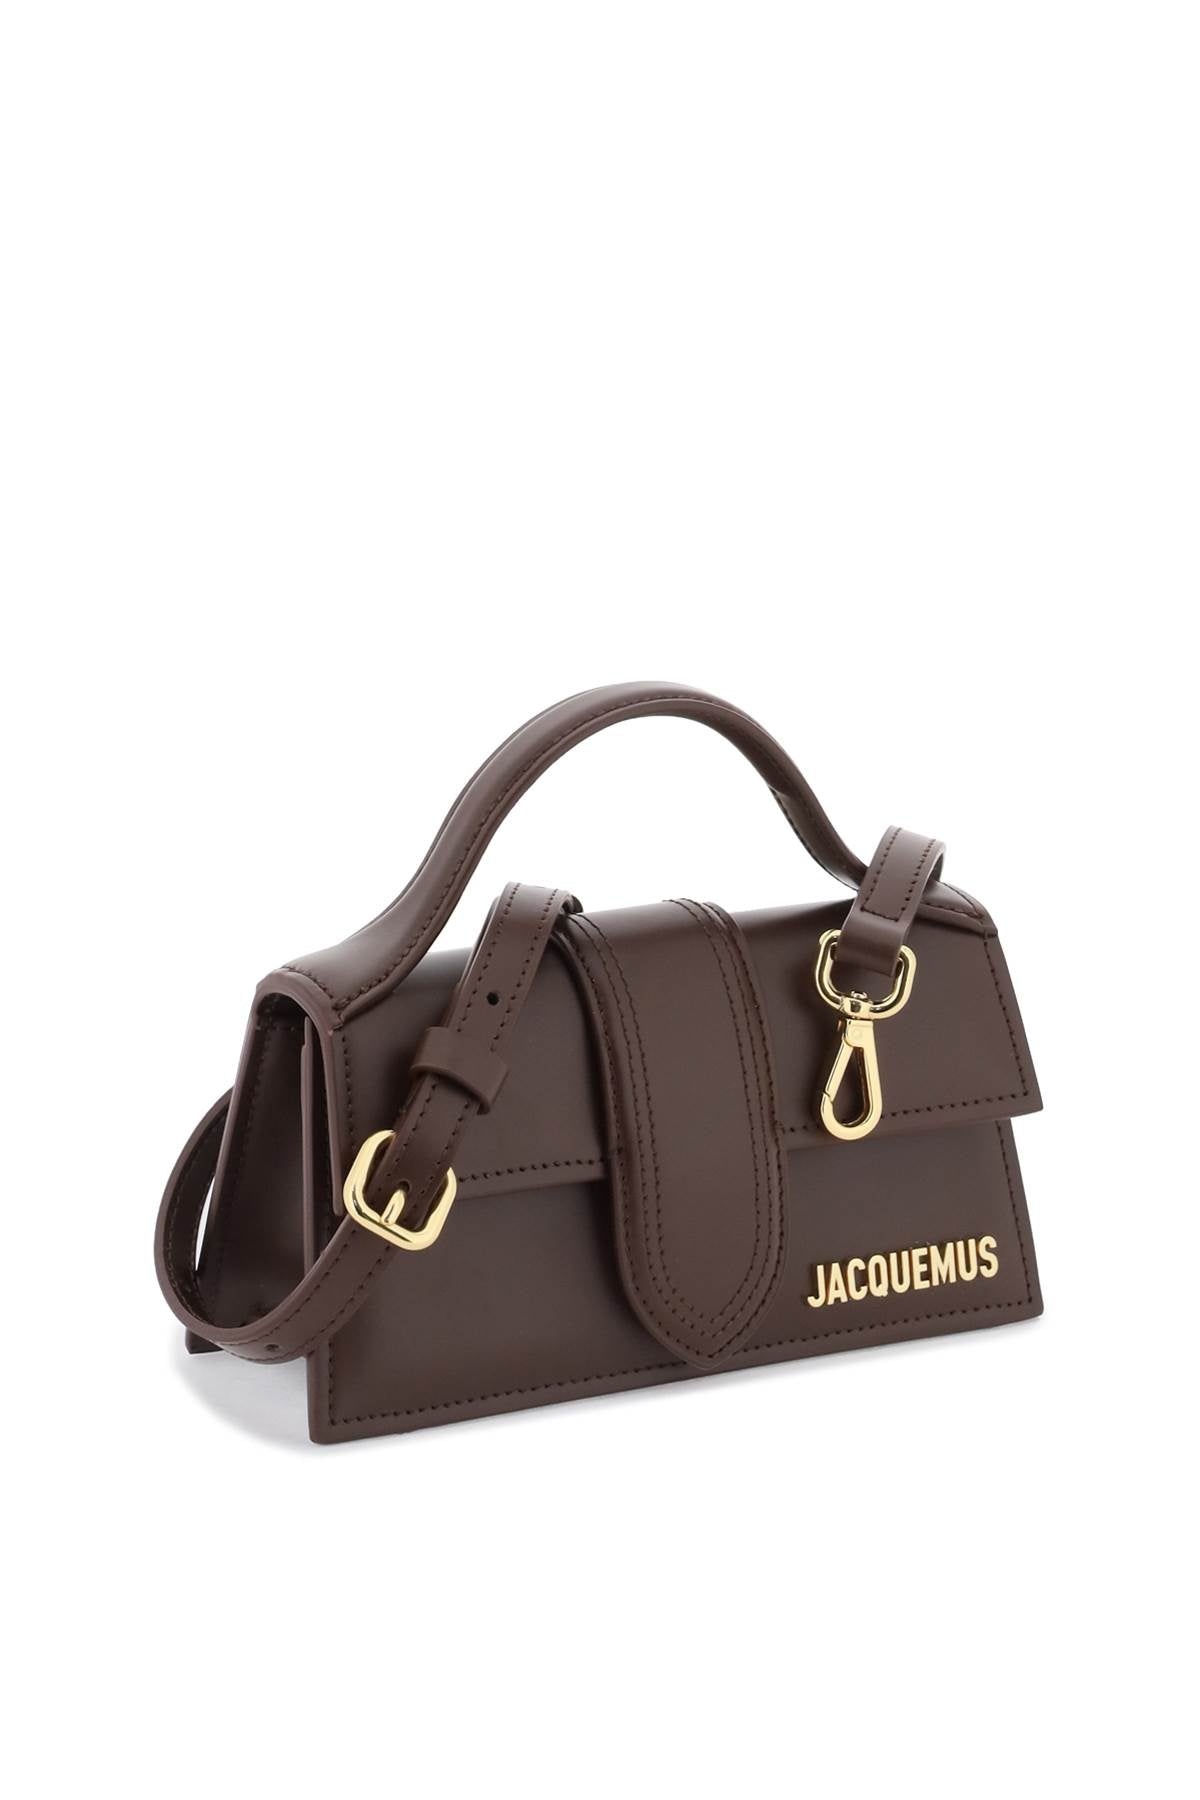 JACQUEMUS Chic Mini Leather Handbag with Gold Details and Convertible Strap - Brown